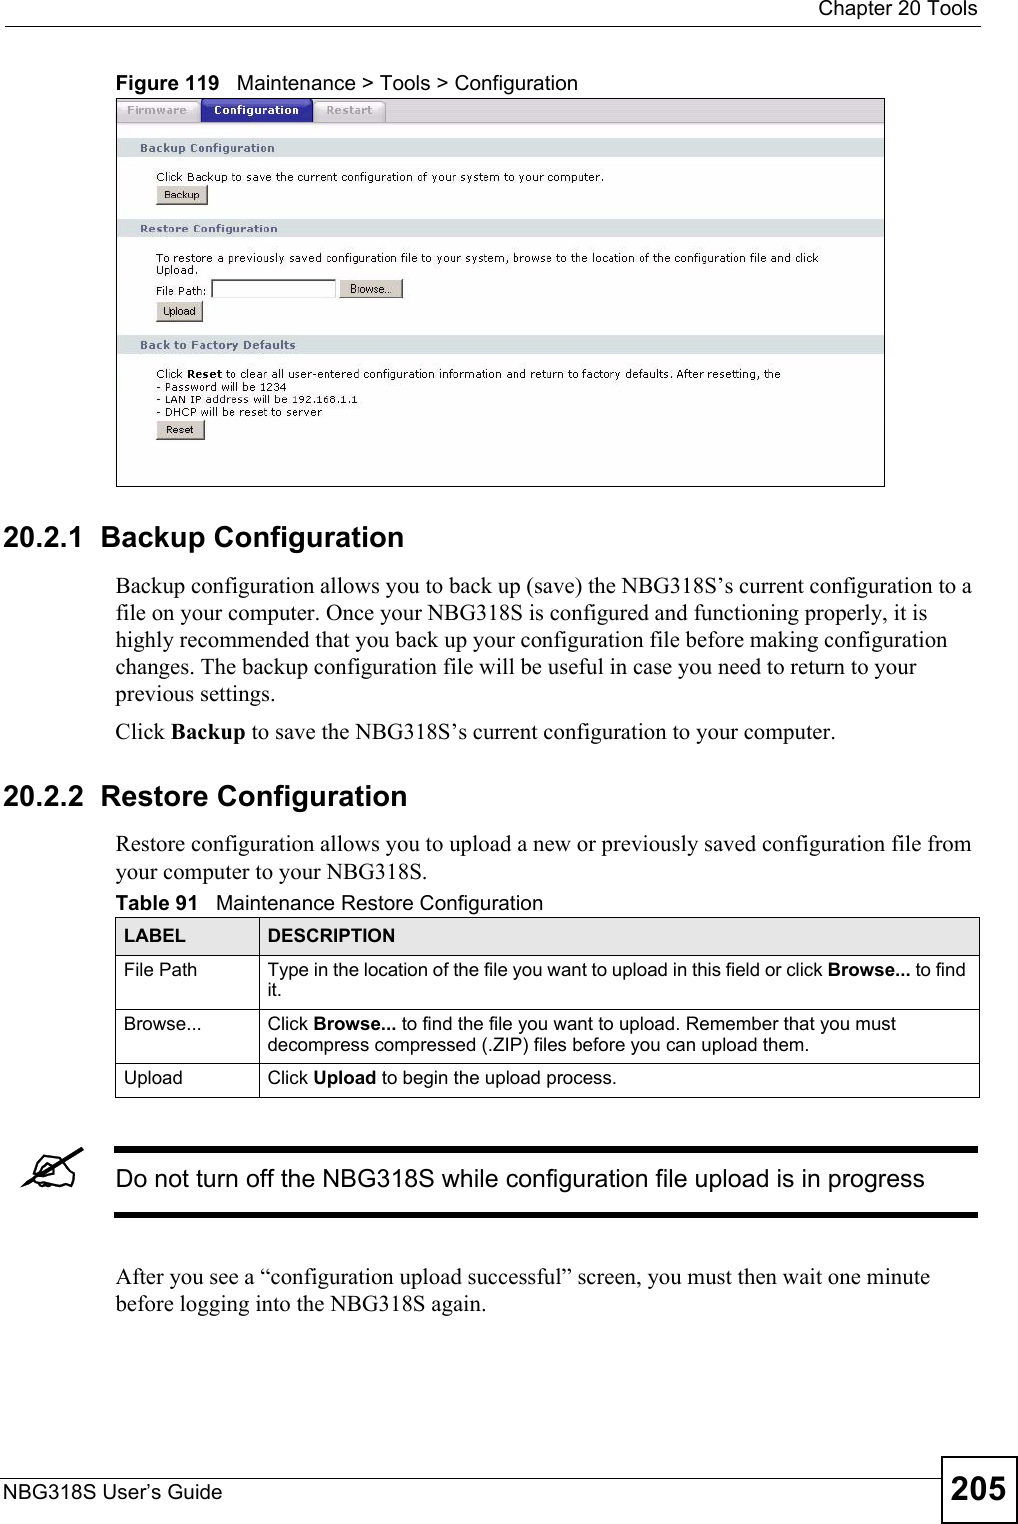  Chapter 20 ToolsNBG318S User’s Guide 205Figure 119   Maintenance &gt; Tools &gt; Configuration 20.2.1  Backup ConfigurationBackup configuration allows you to back up (save) the NBG318S’s current configuration to a file on your computer. Once your NBG318S is configured and functioning properly, it is highly recommended that you back up your configuration file before making configuration changes. The backup configuration file will be useful in case you need to return to your previous settings. Click Backup to save the NBG318S’s current configuration to your computer.20.2.2  Restore ConfigurationRestore configuration allows you to upload a new or previously saved configuration file from your computer to your NBG318S.&quot;Do not turn off the NBG318S while configuration file upload is in progressAfter you see a “configuration upload successful” screen, you must then wait one minute before logging into the NBG318S again. Table 91   Maintenance Restore ConfigurationLABEL DESCRIPTIONFile Path  Type in the location of the file you want to upload in this field or click Browse... to find it.Browse...  Click Browse... to find the file you want to upload. Remember that you must decompress compressed (.ZIP) files before you can upload them. Upload  Click Upload to begin the upload process.